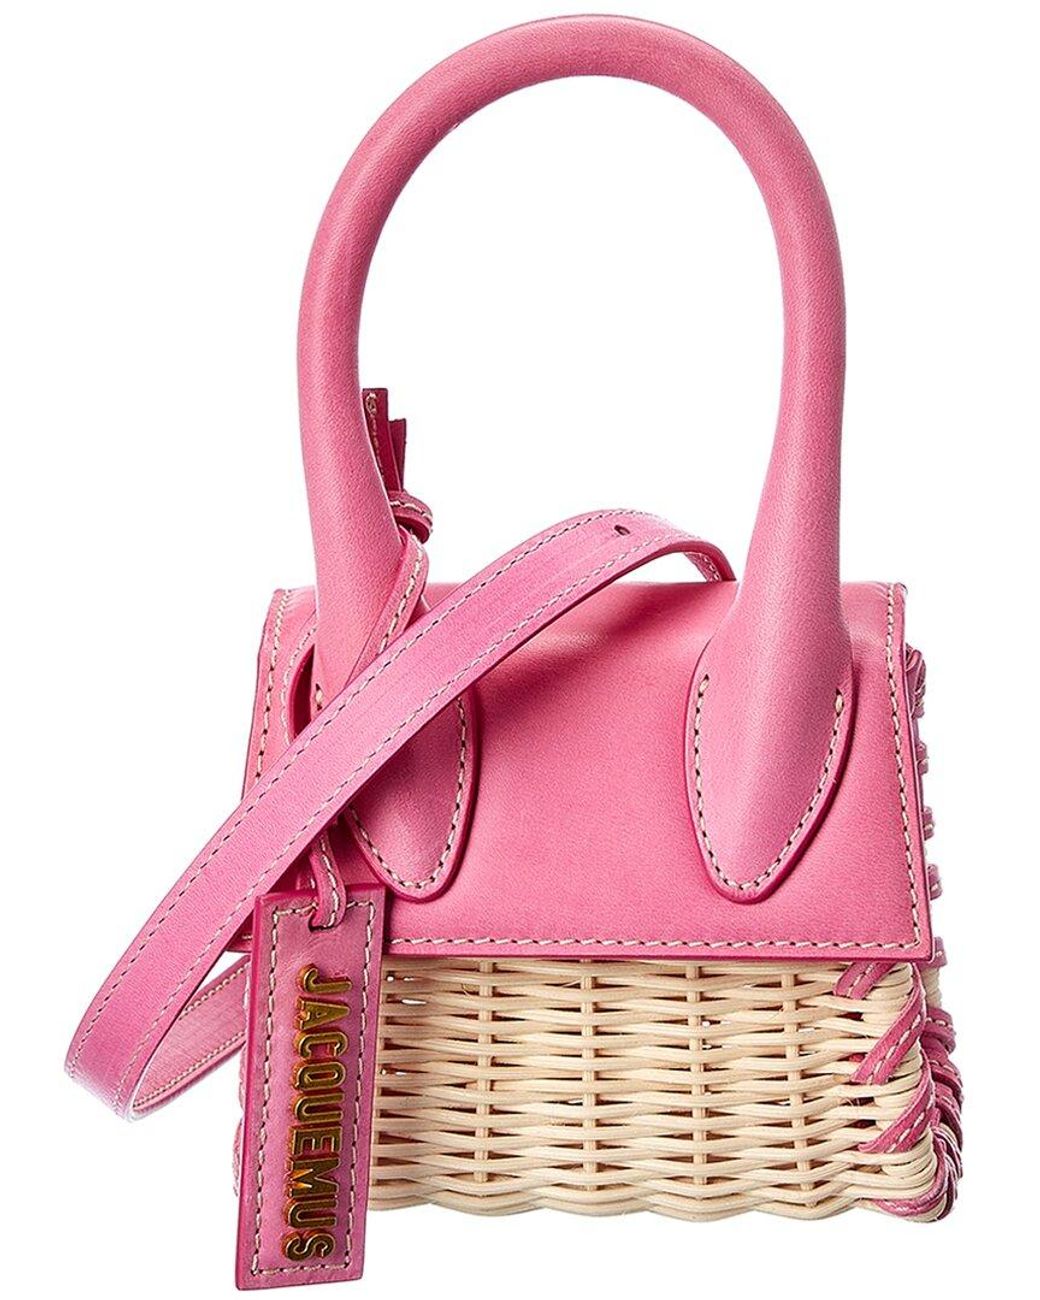 Jacquemus Le Chiquito Mini Straw & Leather Shoulder Bag in Pink